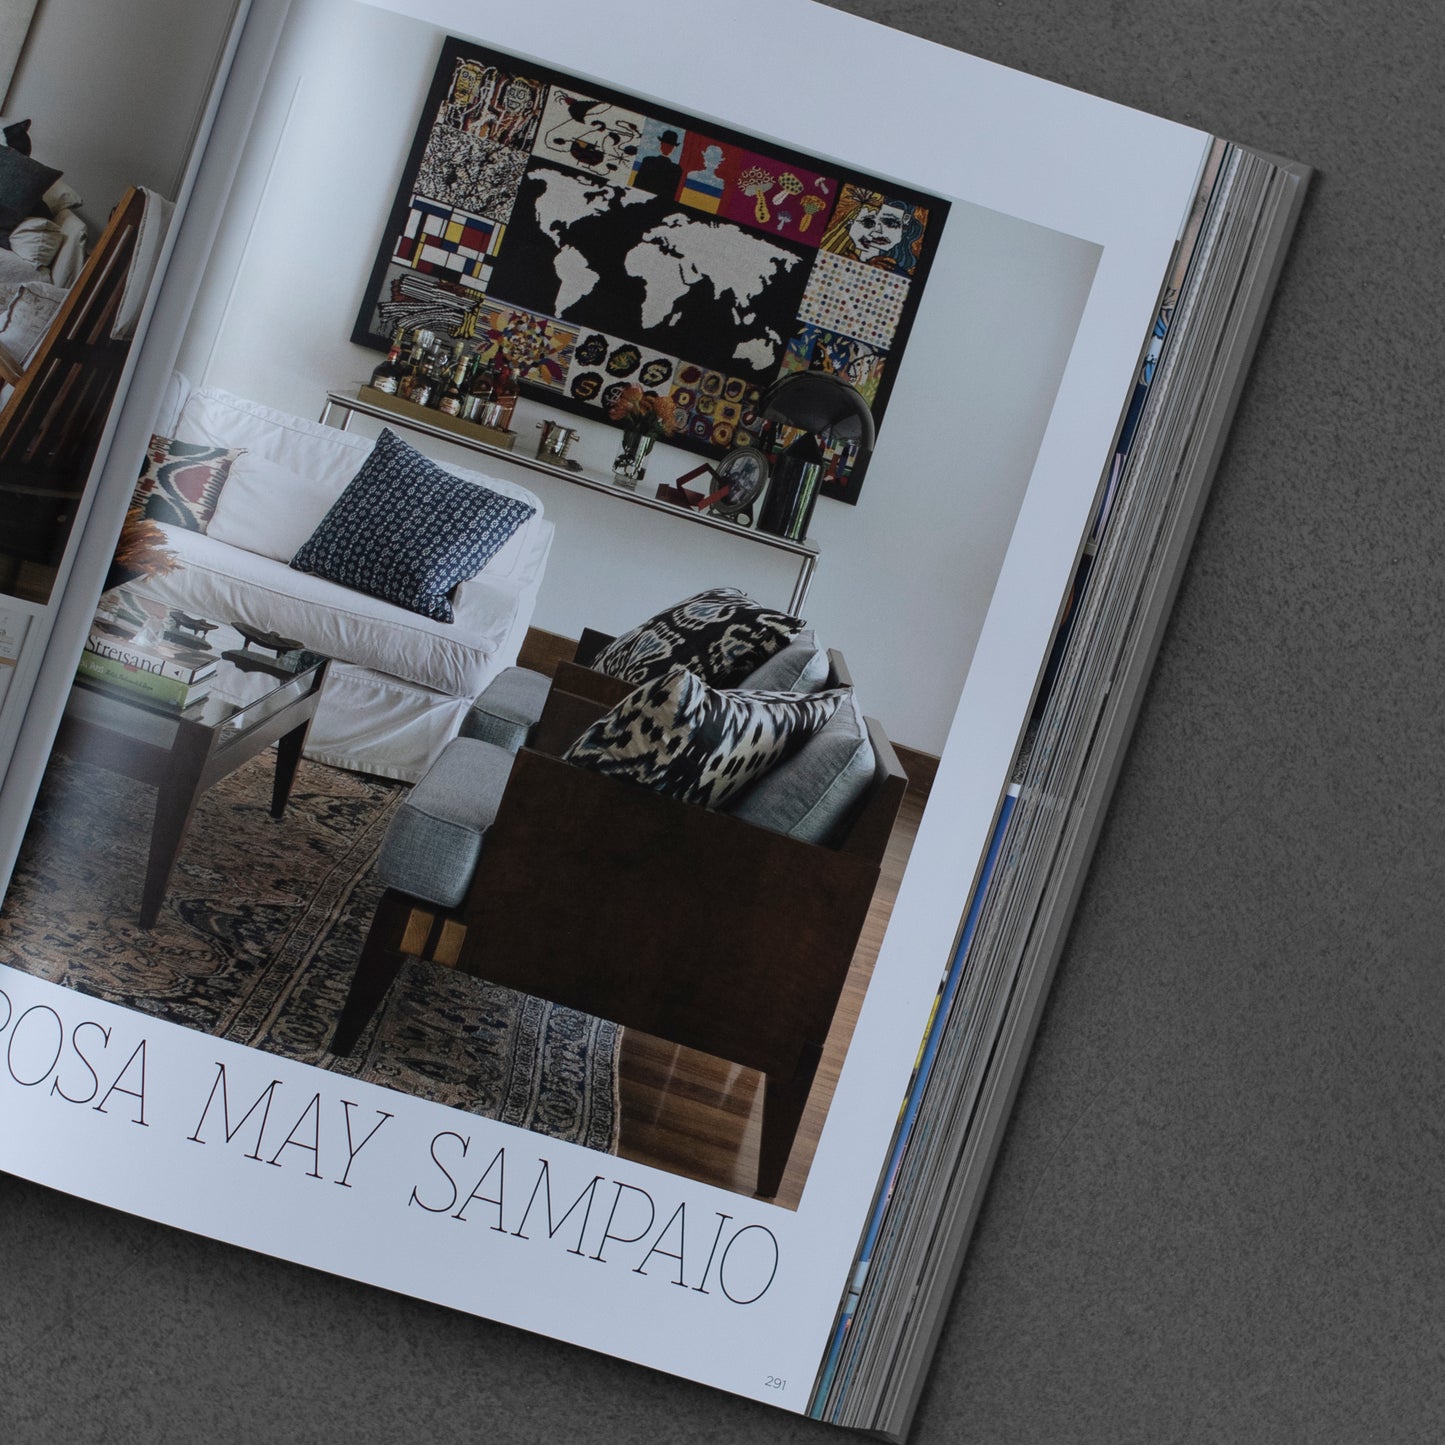 Andrew Martin Interior Design Review Vol.25 The Definitive Guide to the World's Top 100 Designers